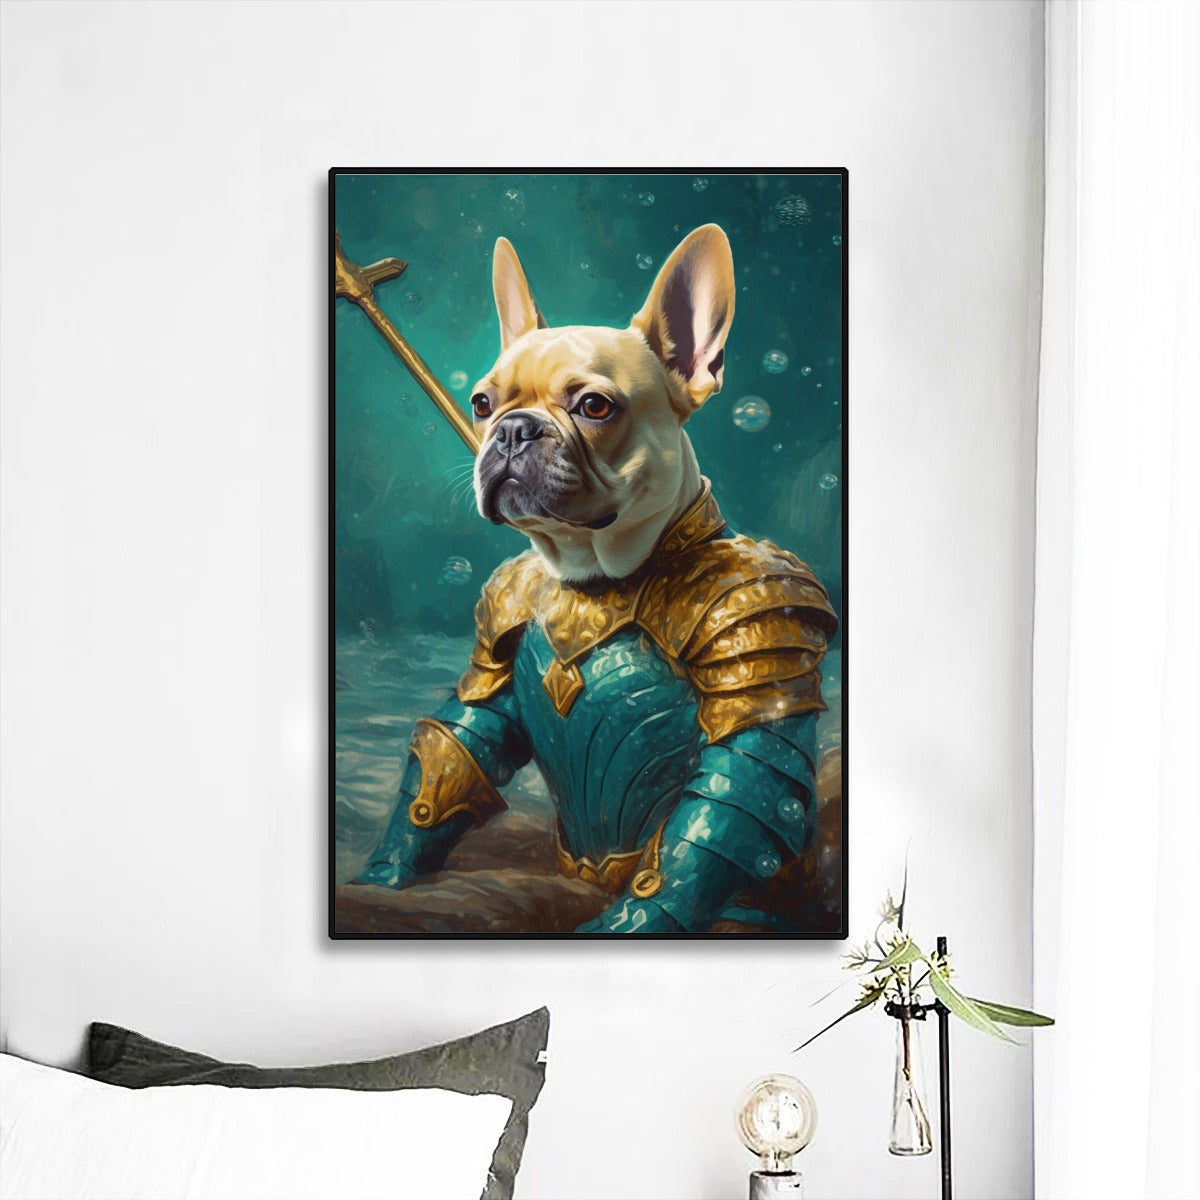 Engaging Frenchie-Depicted Wall Mural